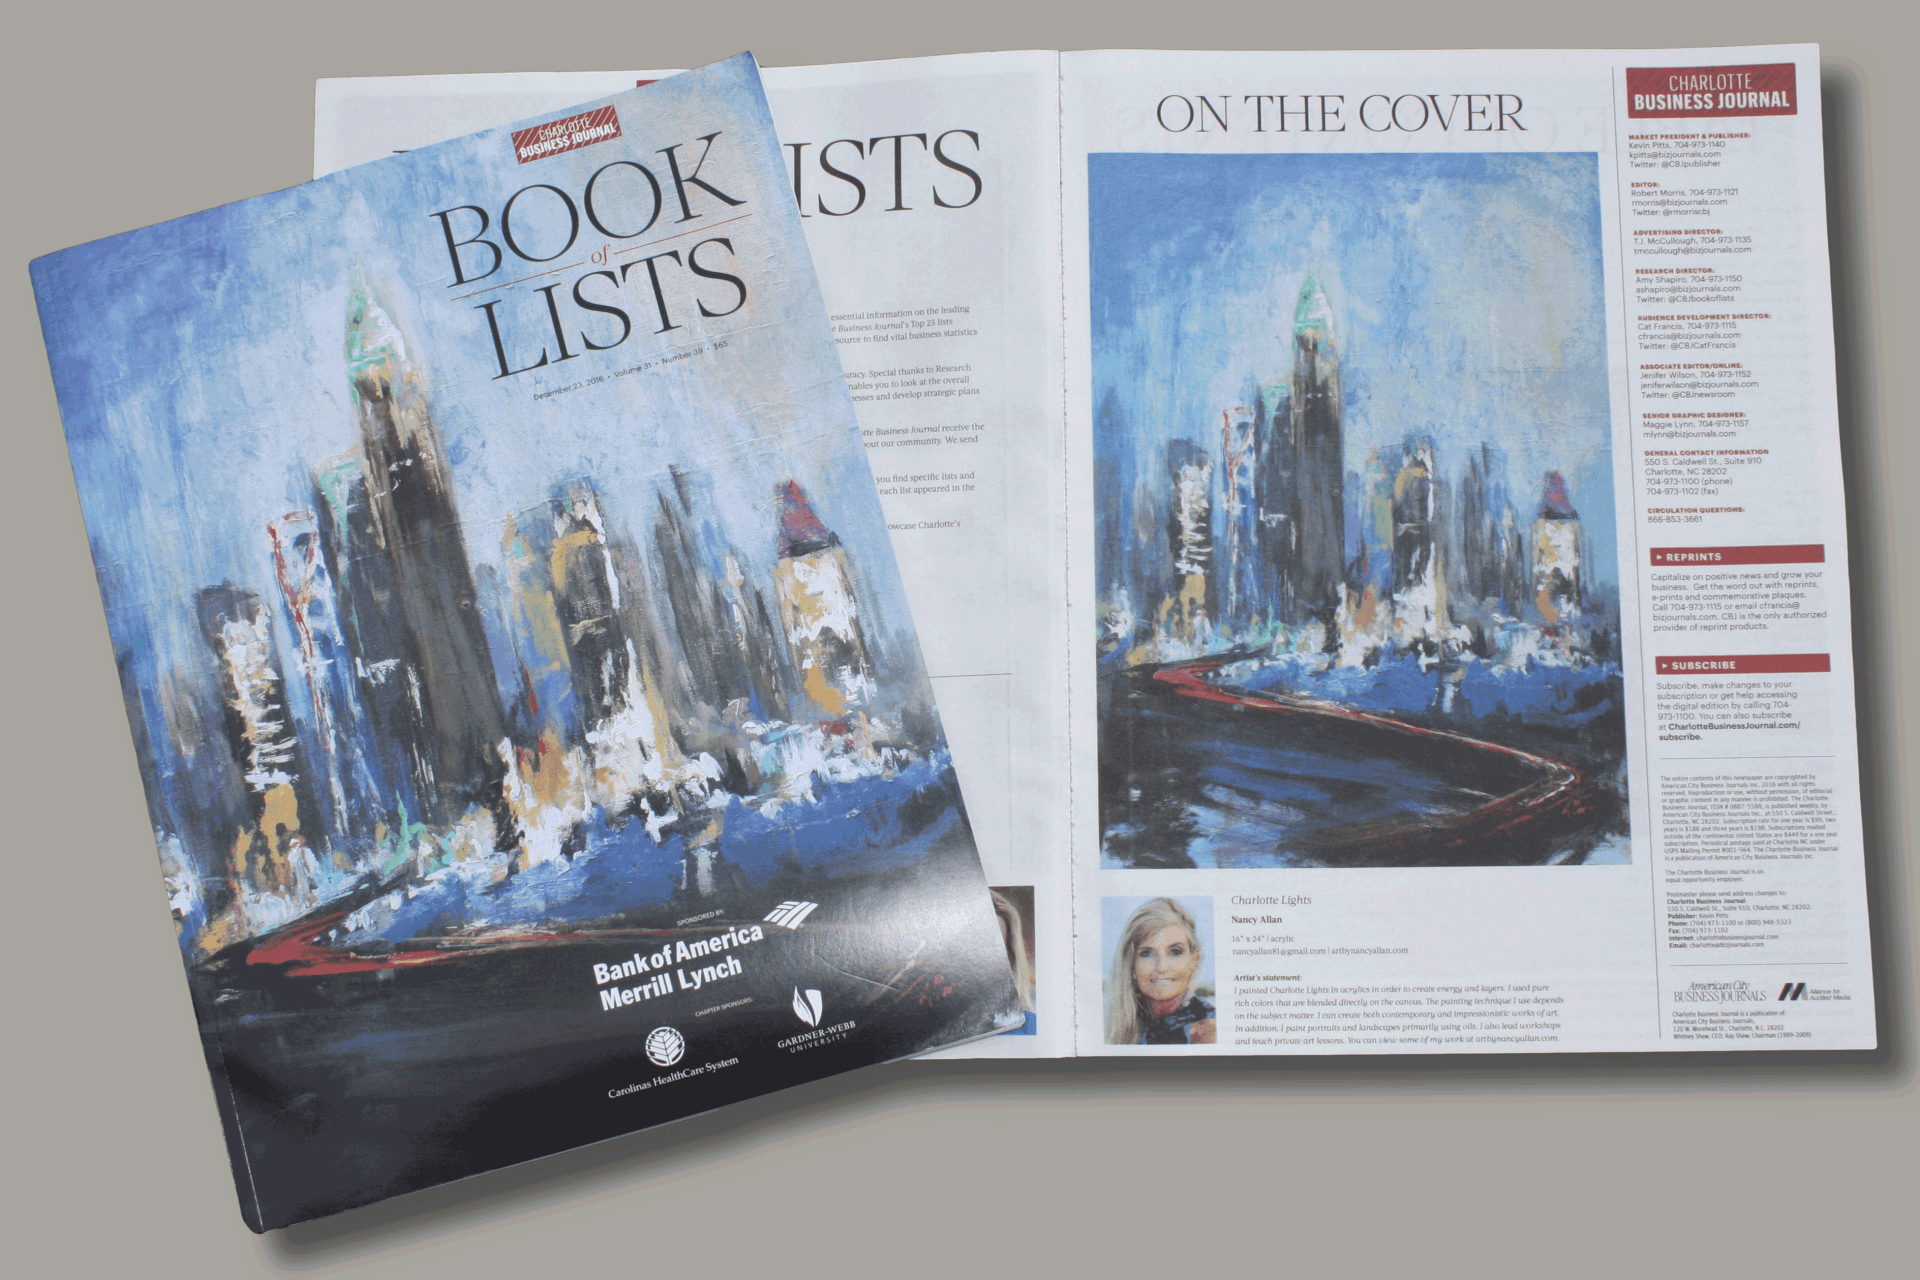 Nancy Allan's award winning painting on cover of Book of Lists